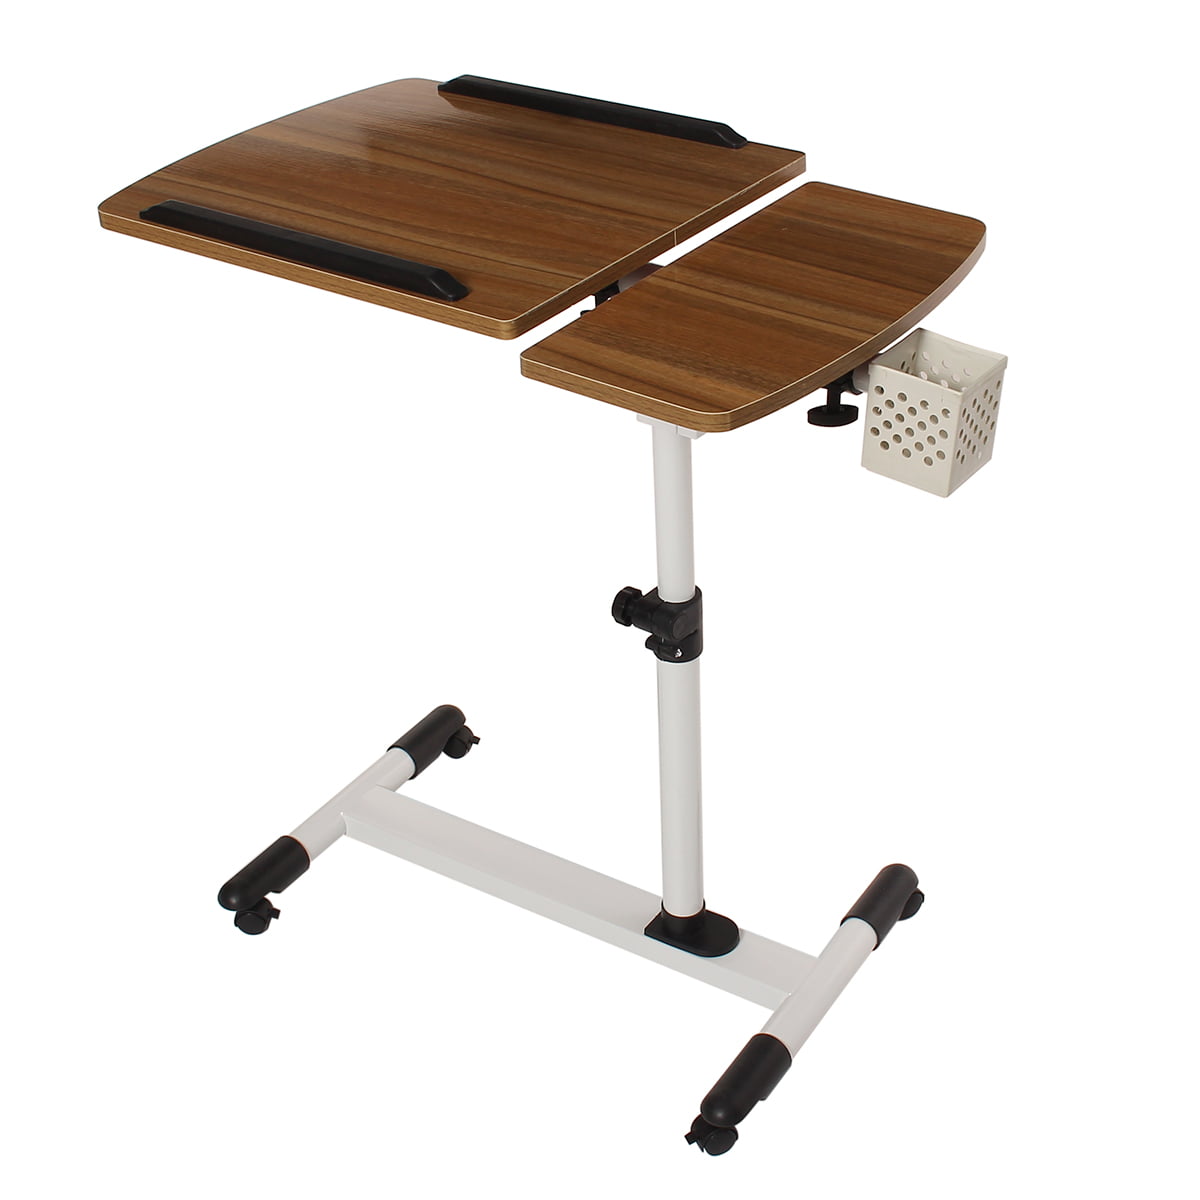 Height Adjustable Table Mobile Side Table Portable Laptop Computer Stand with 4 Wheels Flexible Wooden Stand Desk for Bed Sofa Hospital Reading Eating Nature 